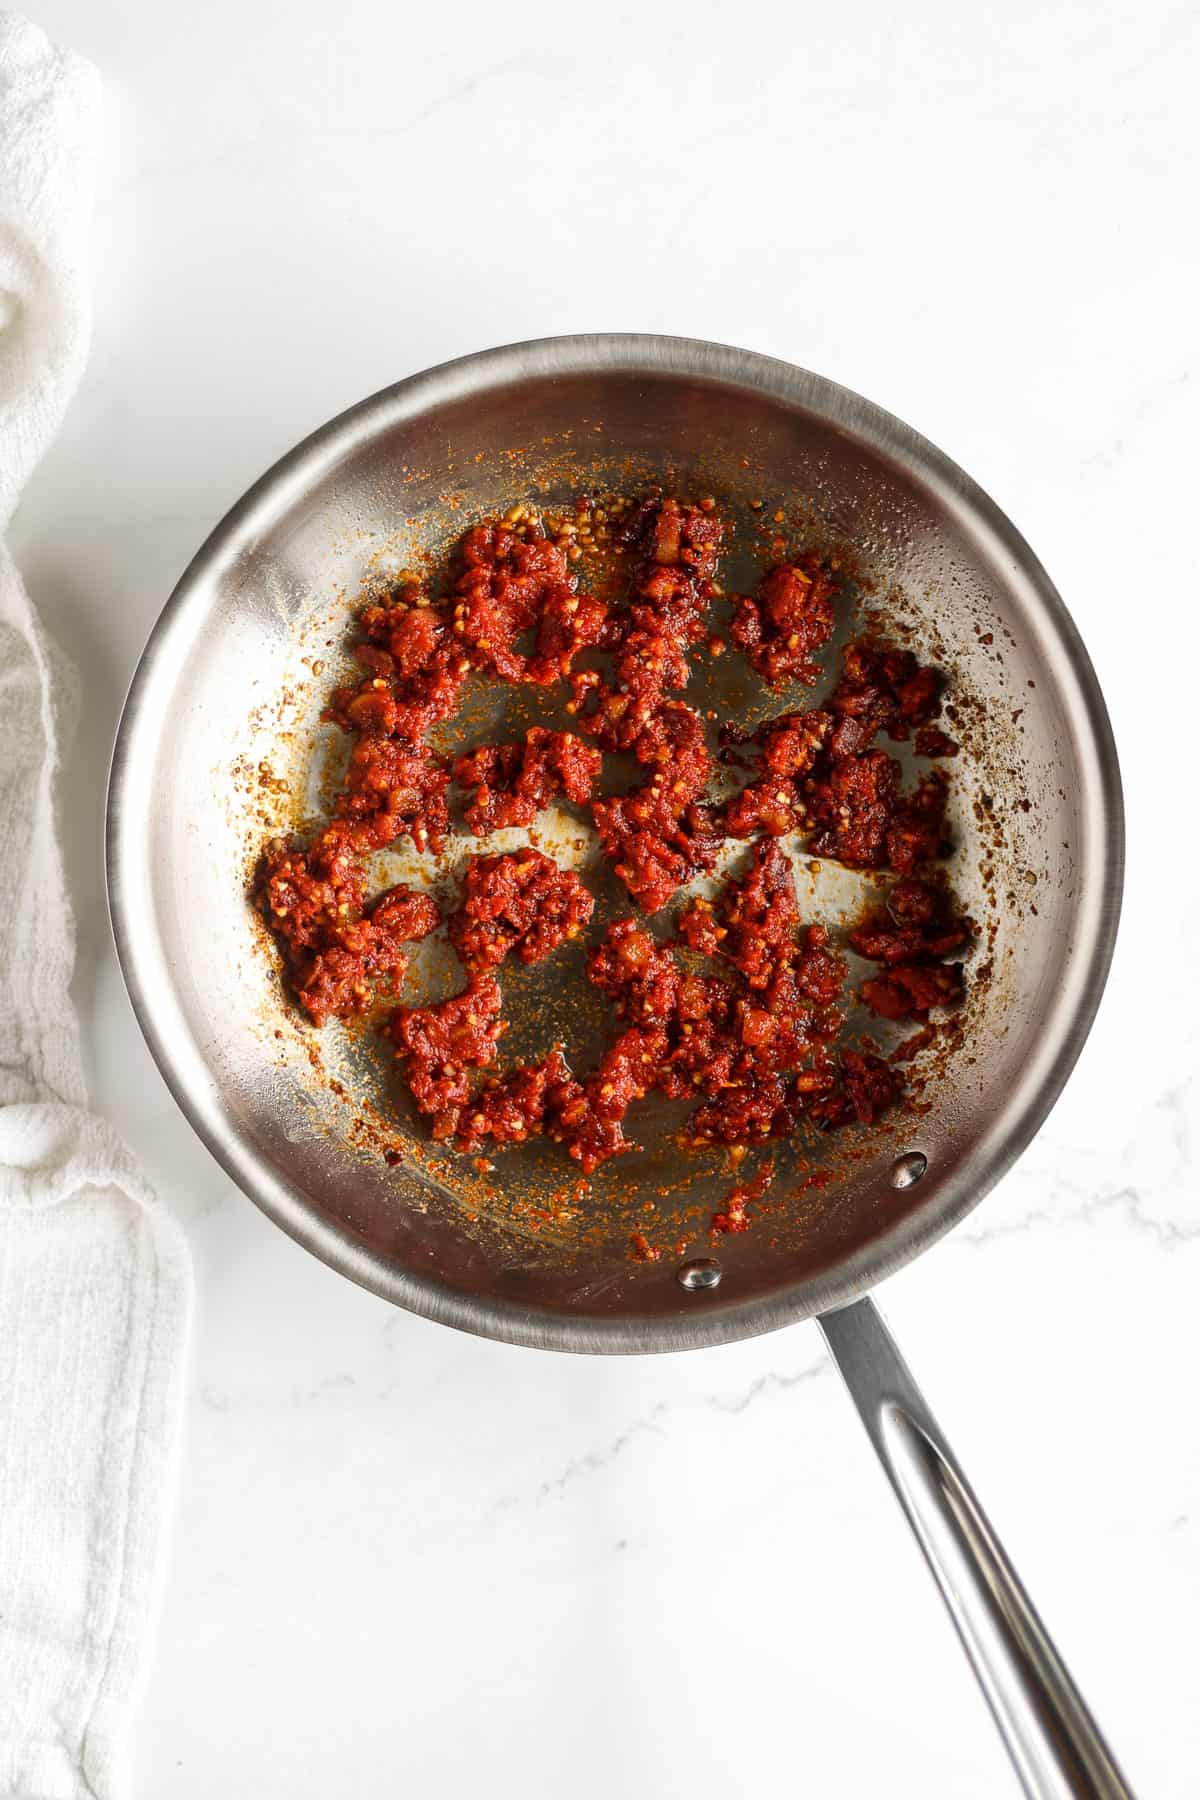 Sauce with tomato paste and crushed red pepper.